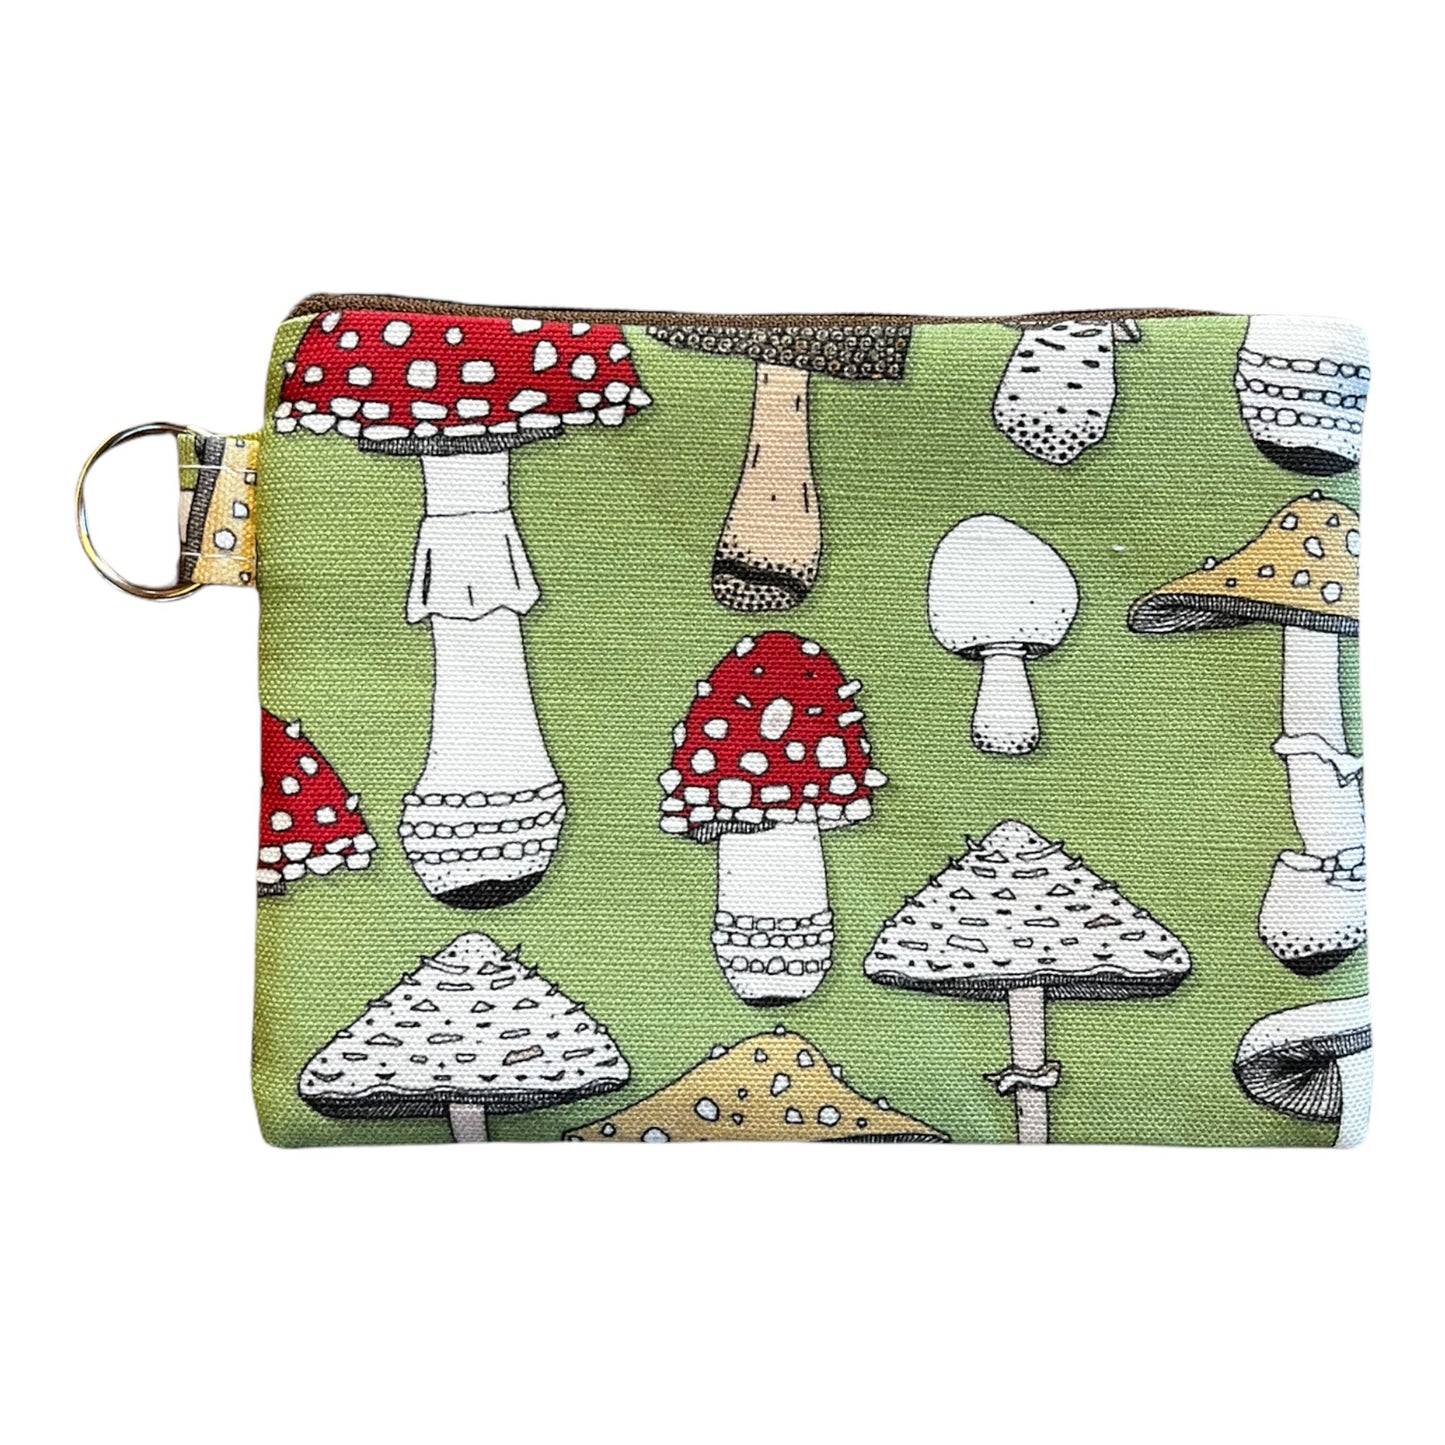 Mushroom coin purse, Cottagecore pouch, Amanita linen cotton ditty bag, forager gift, 6" x 4.5"